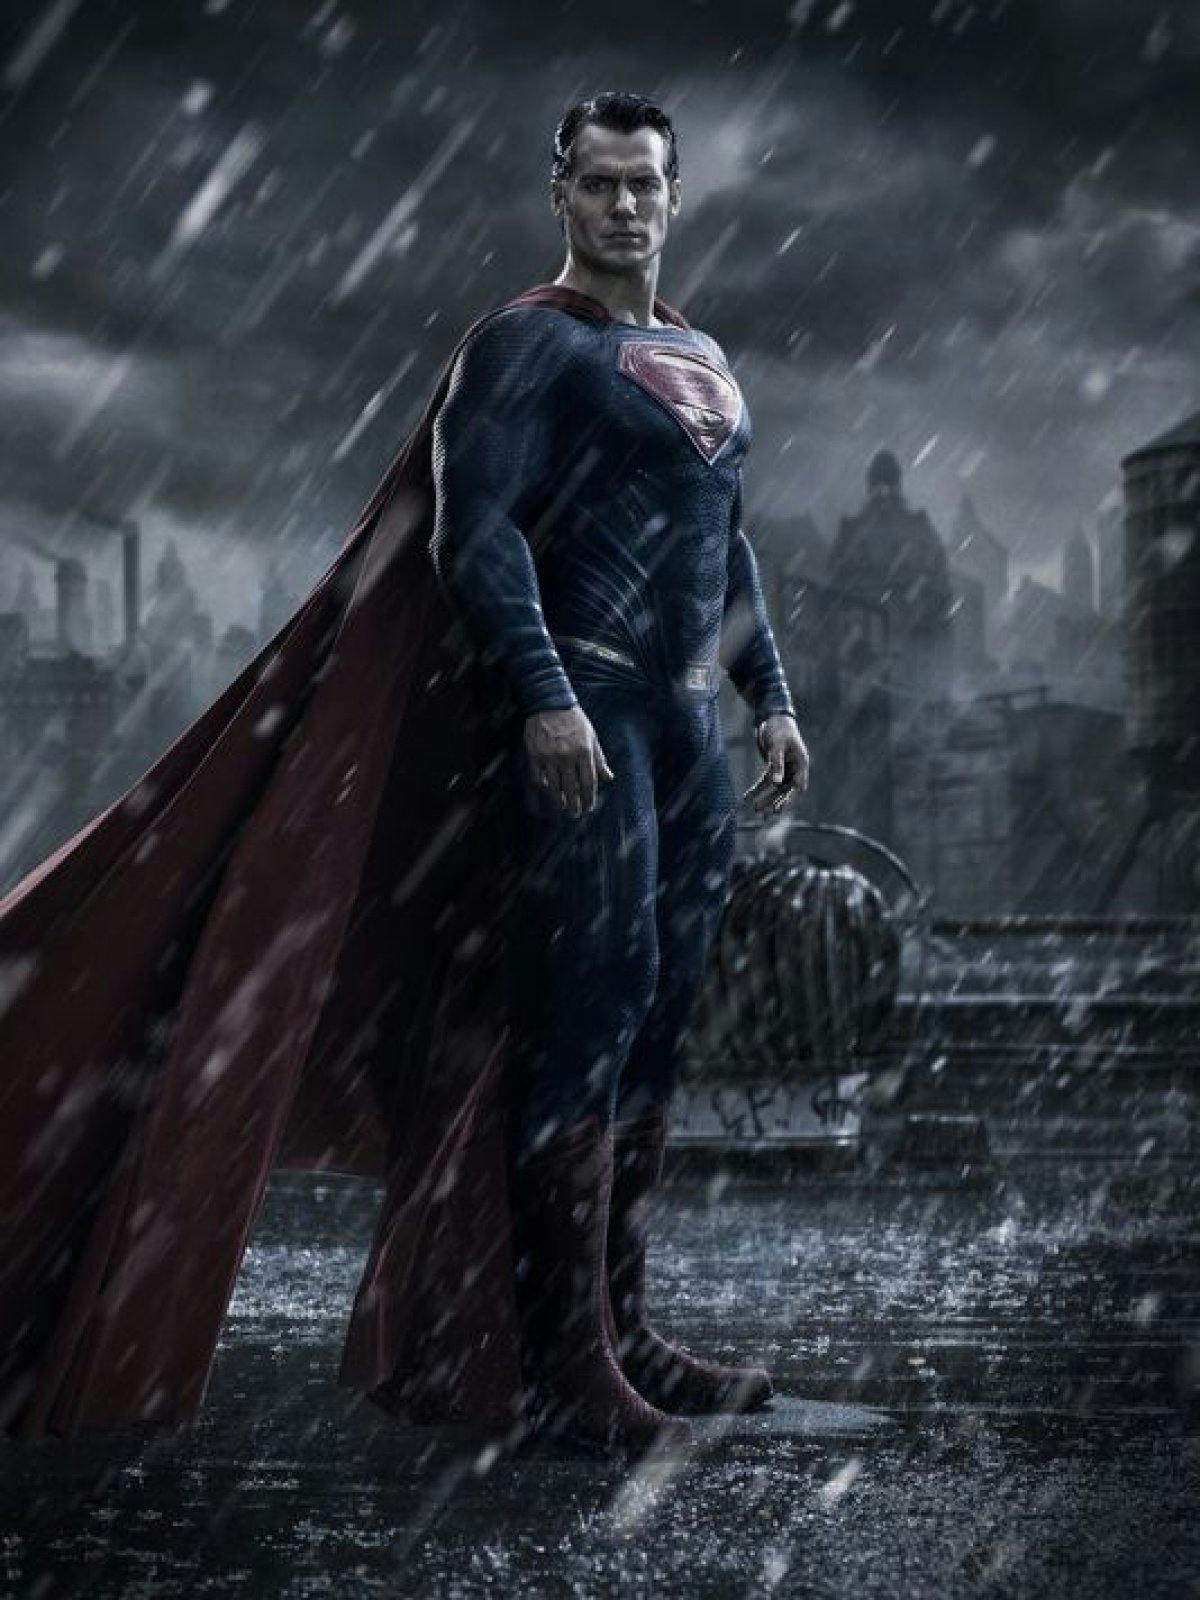 Superman in the rain from 'Batman v Superman: Dawn of Justice' 